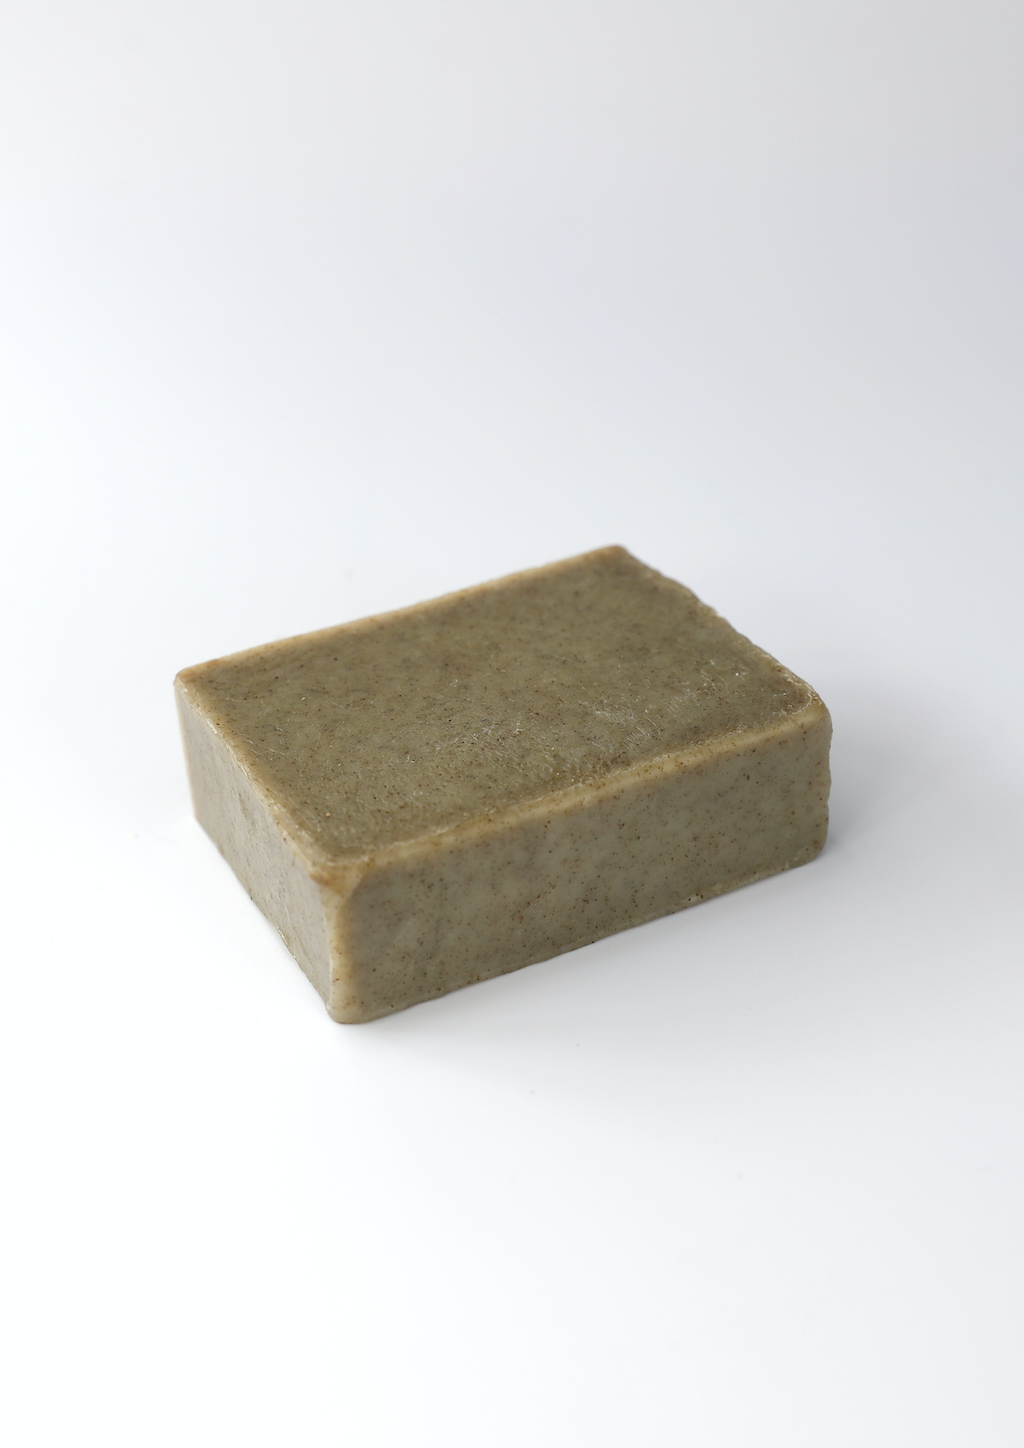 Coraline Skincare Nettle Settle Soap. Organic soap. The dark green soap bar is pictured alone on a plain white background.